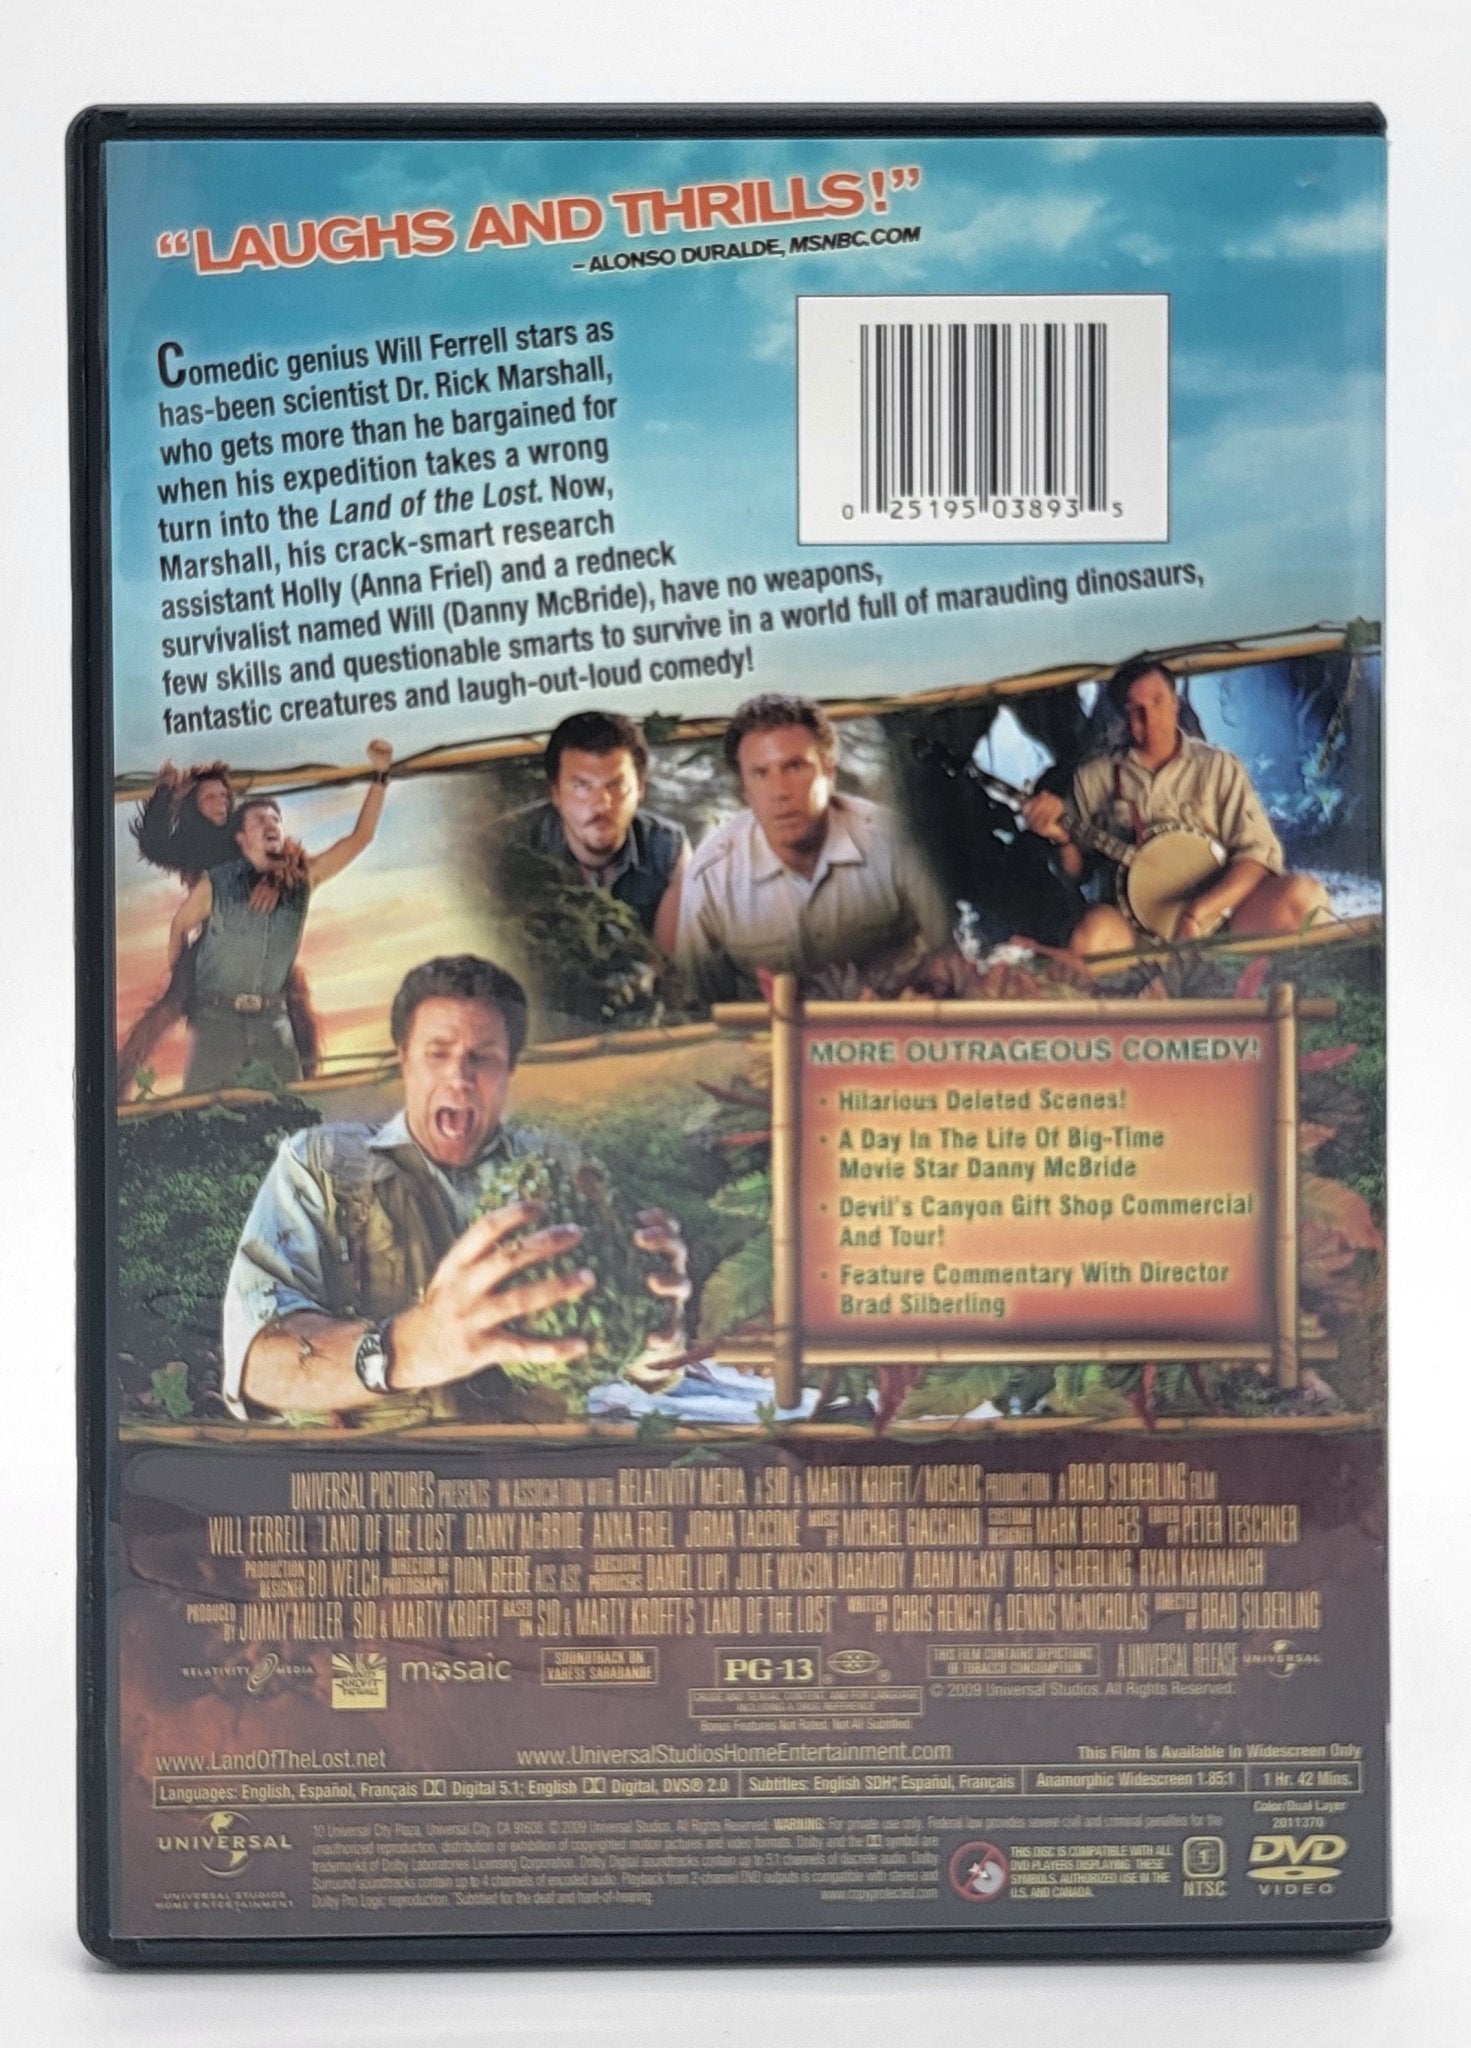 Universal Studios Home Entertainment - Land of the Lost | DVD | Widescreen - DVD - Steady Bunny Shop